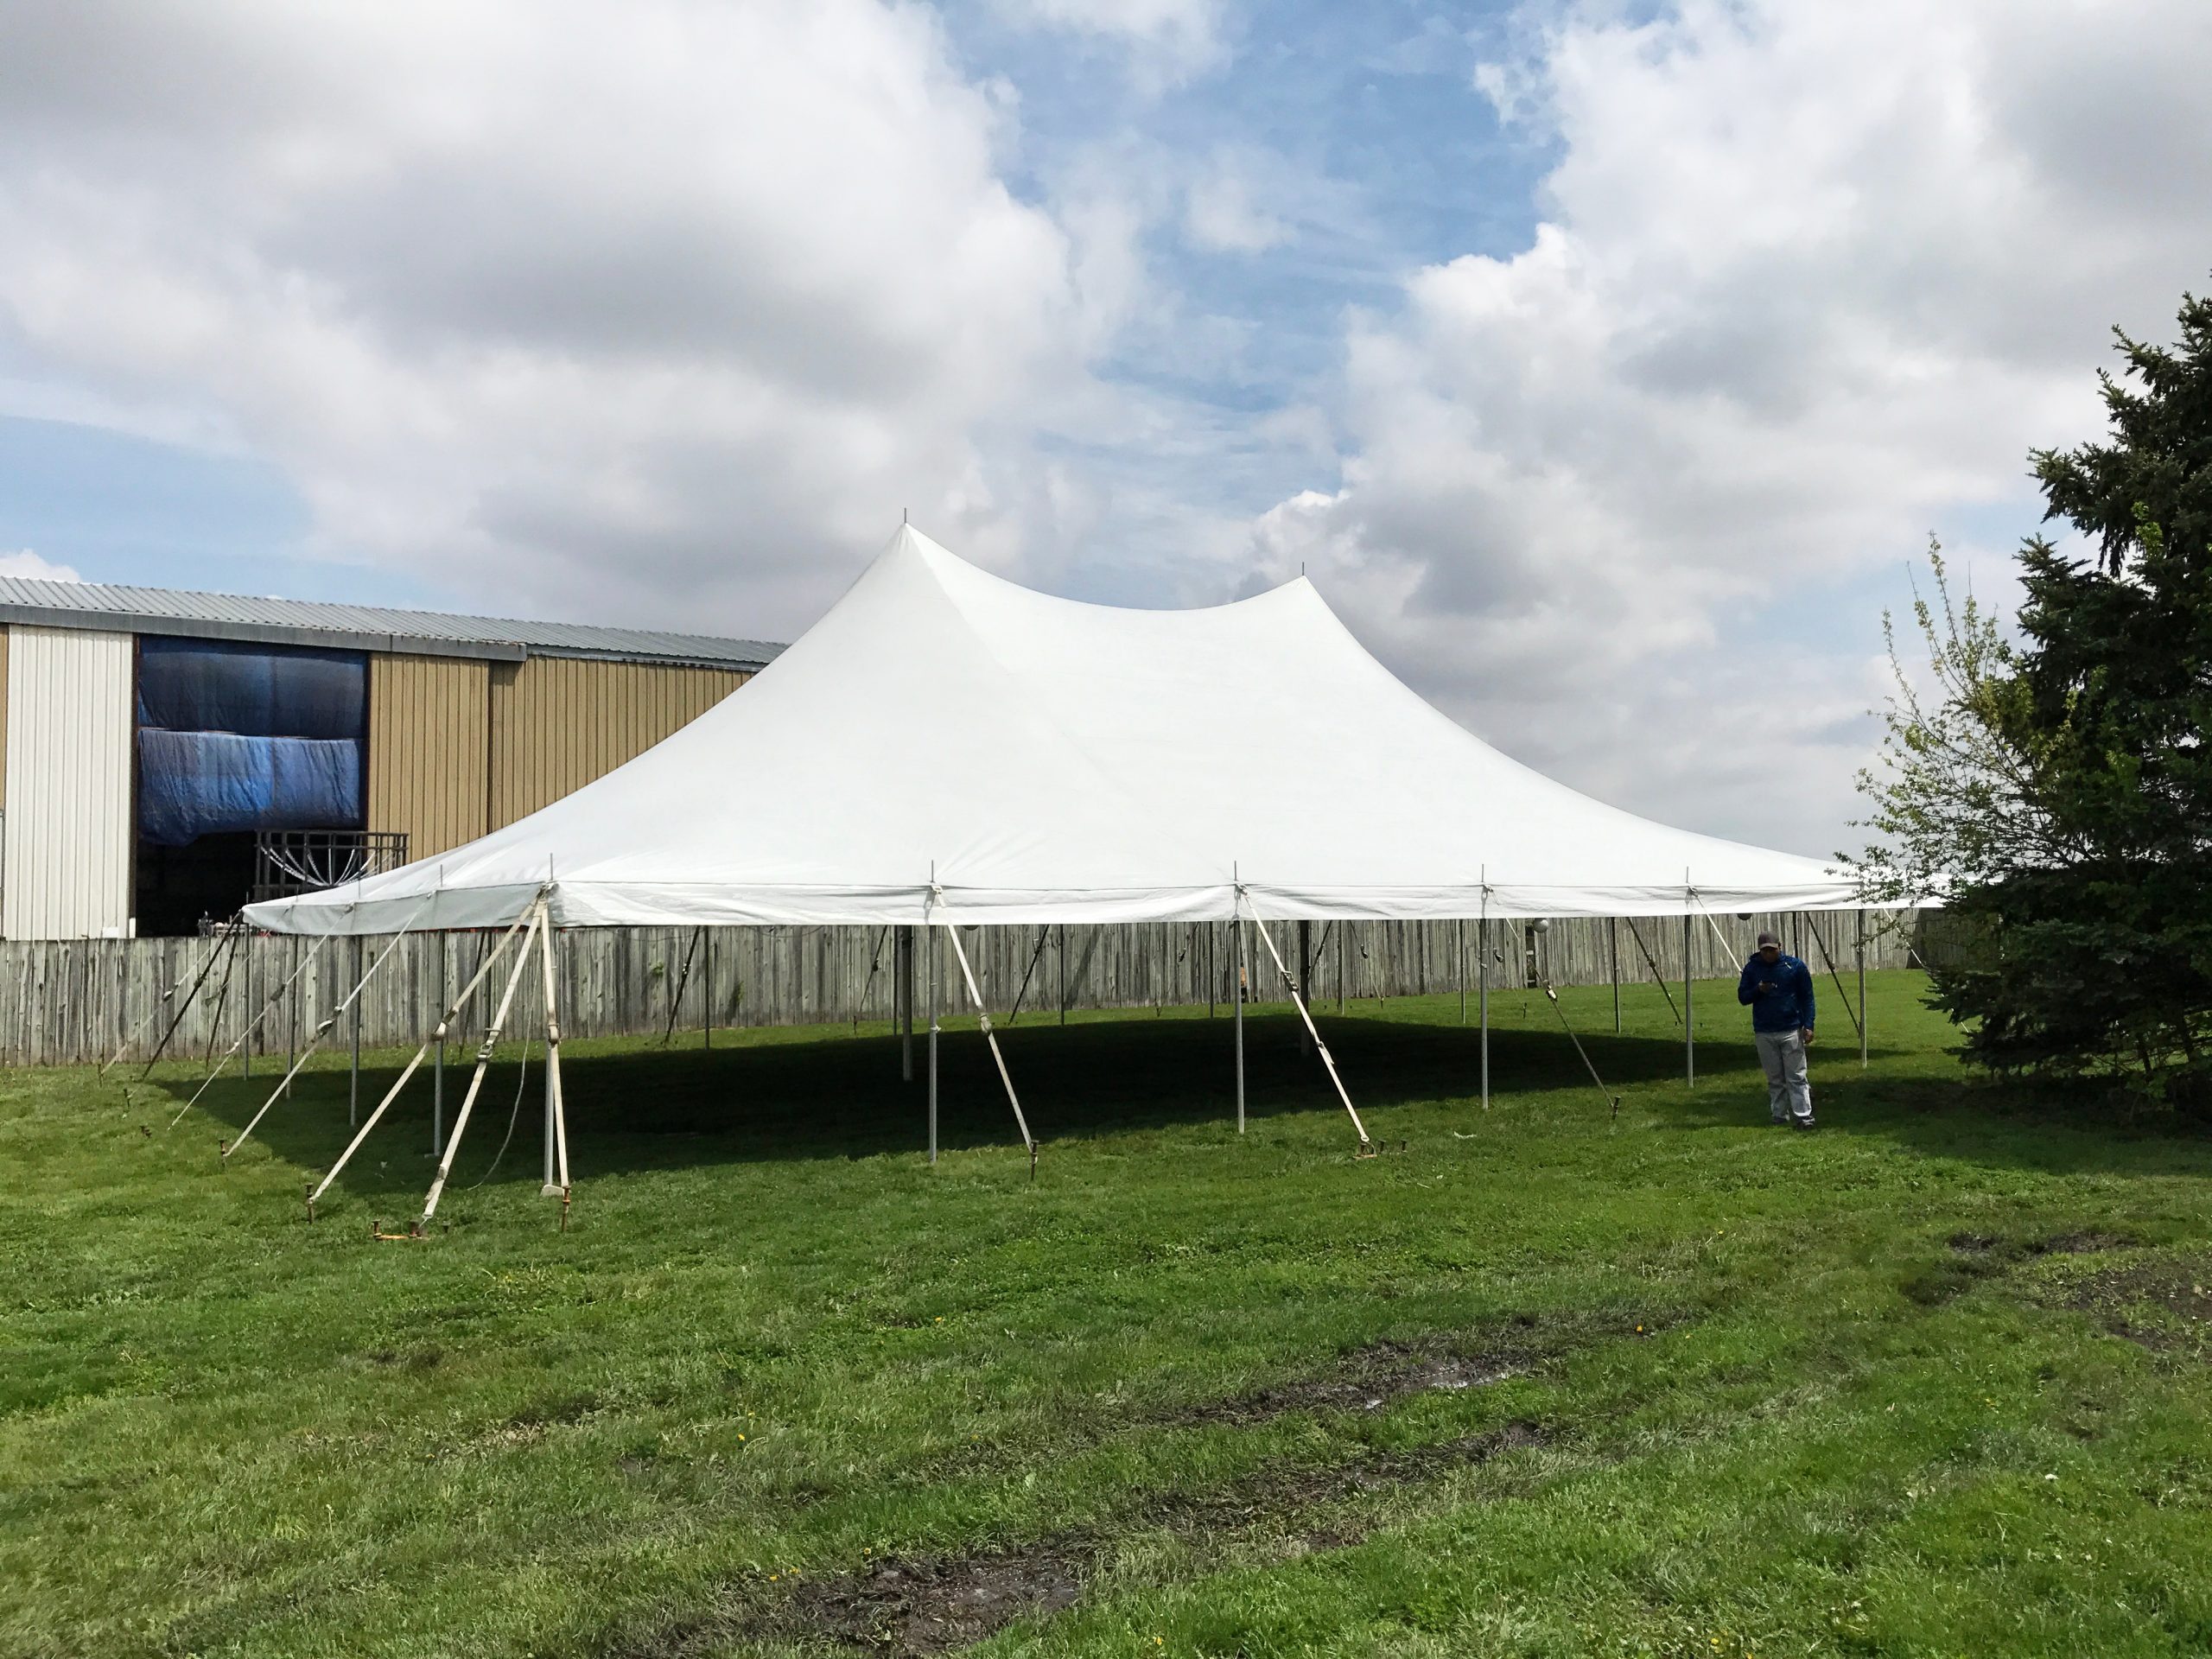 Full view of 40' x 60' rope and pole Birthday Party tent in Washington, Iowa